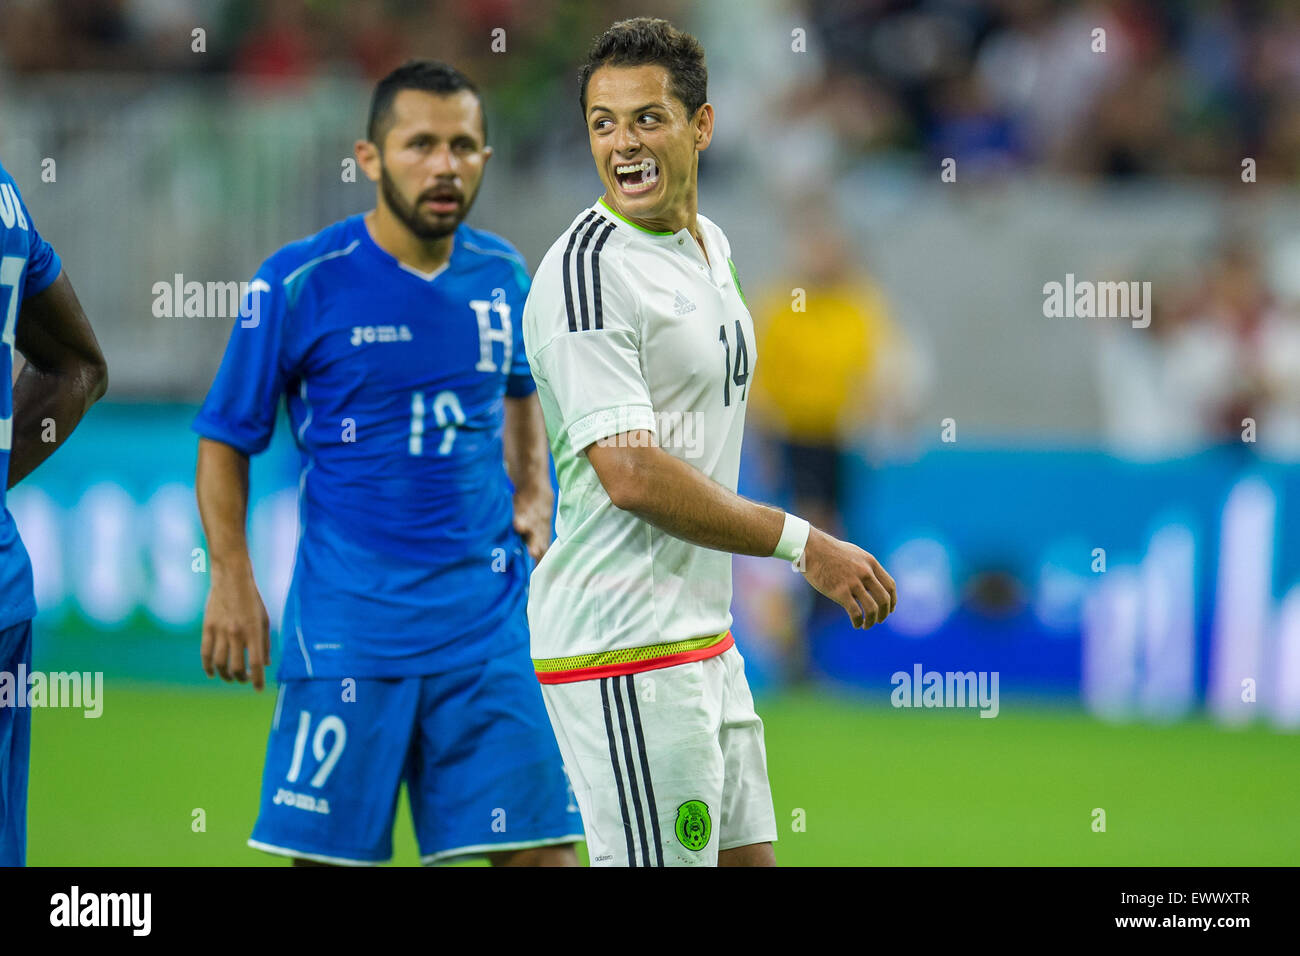 Houston, TX, USA. 1st July, 2015. Mexico forward Javier Hernandez (14) smiles at a teammate during the 1st half of an international soccer match between Honduras and Mexico at NRG Stadium in Houston, TX. Trask Smith/CSM/Alamy Live News Stock Photo